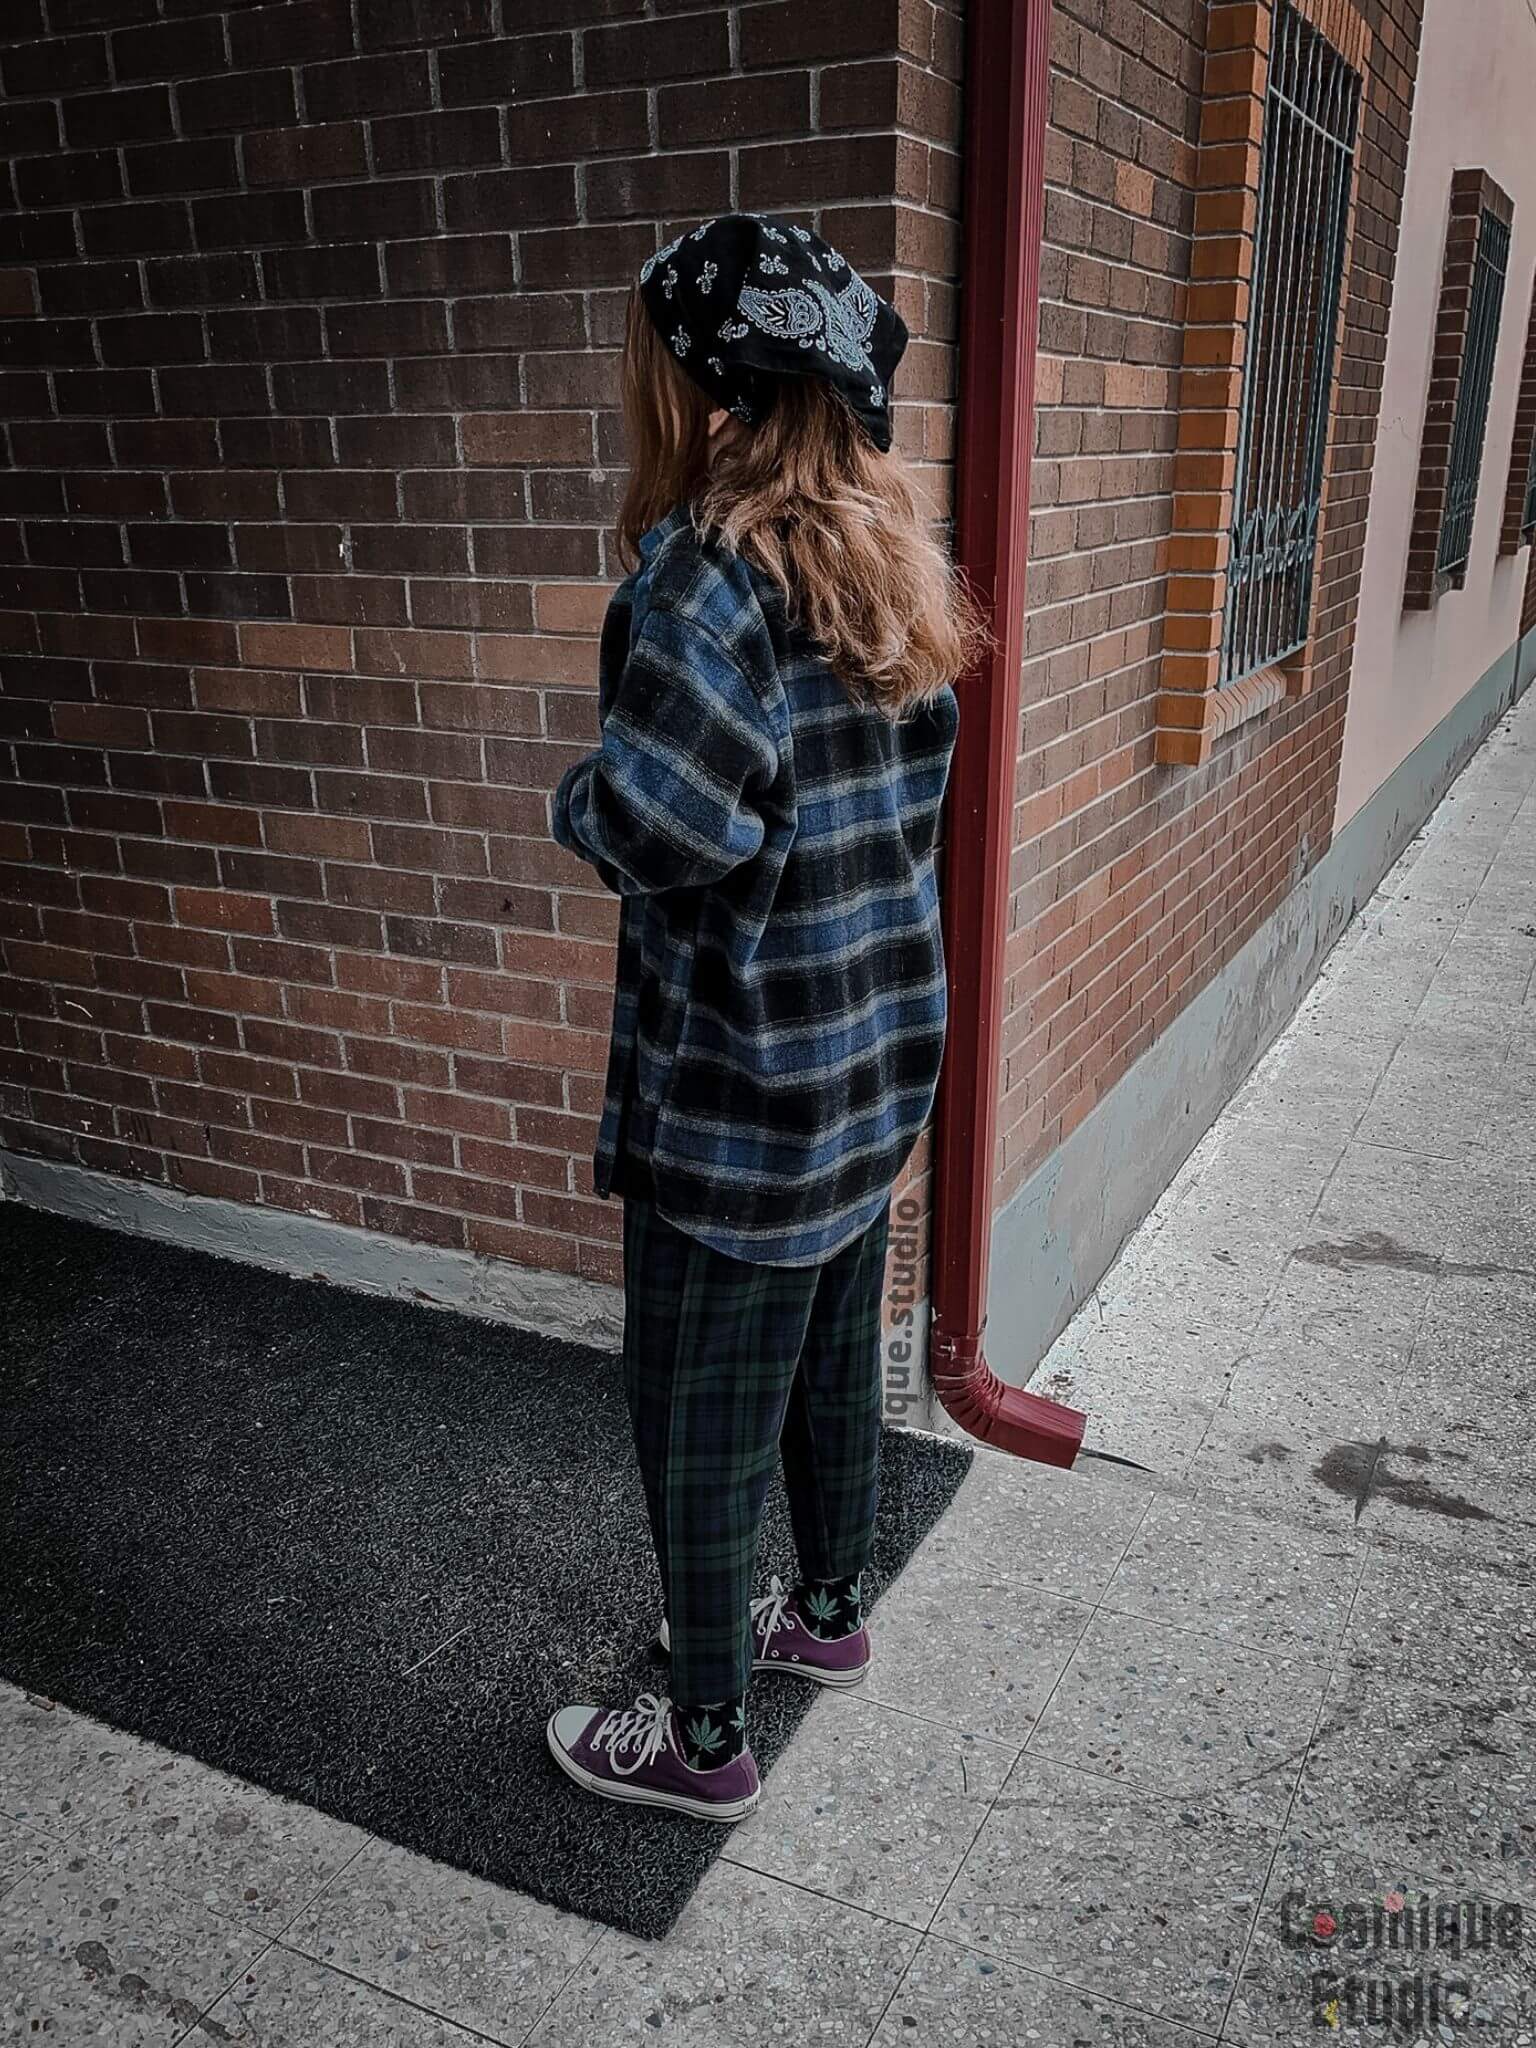 grunge girl on a tile wall wearing vintage blue lumberjack shirt, green baggy plaid pants, converse, completed with weed socks and bandana